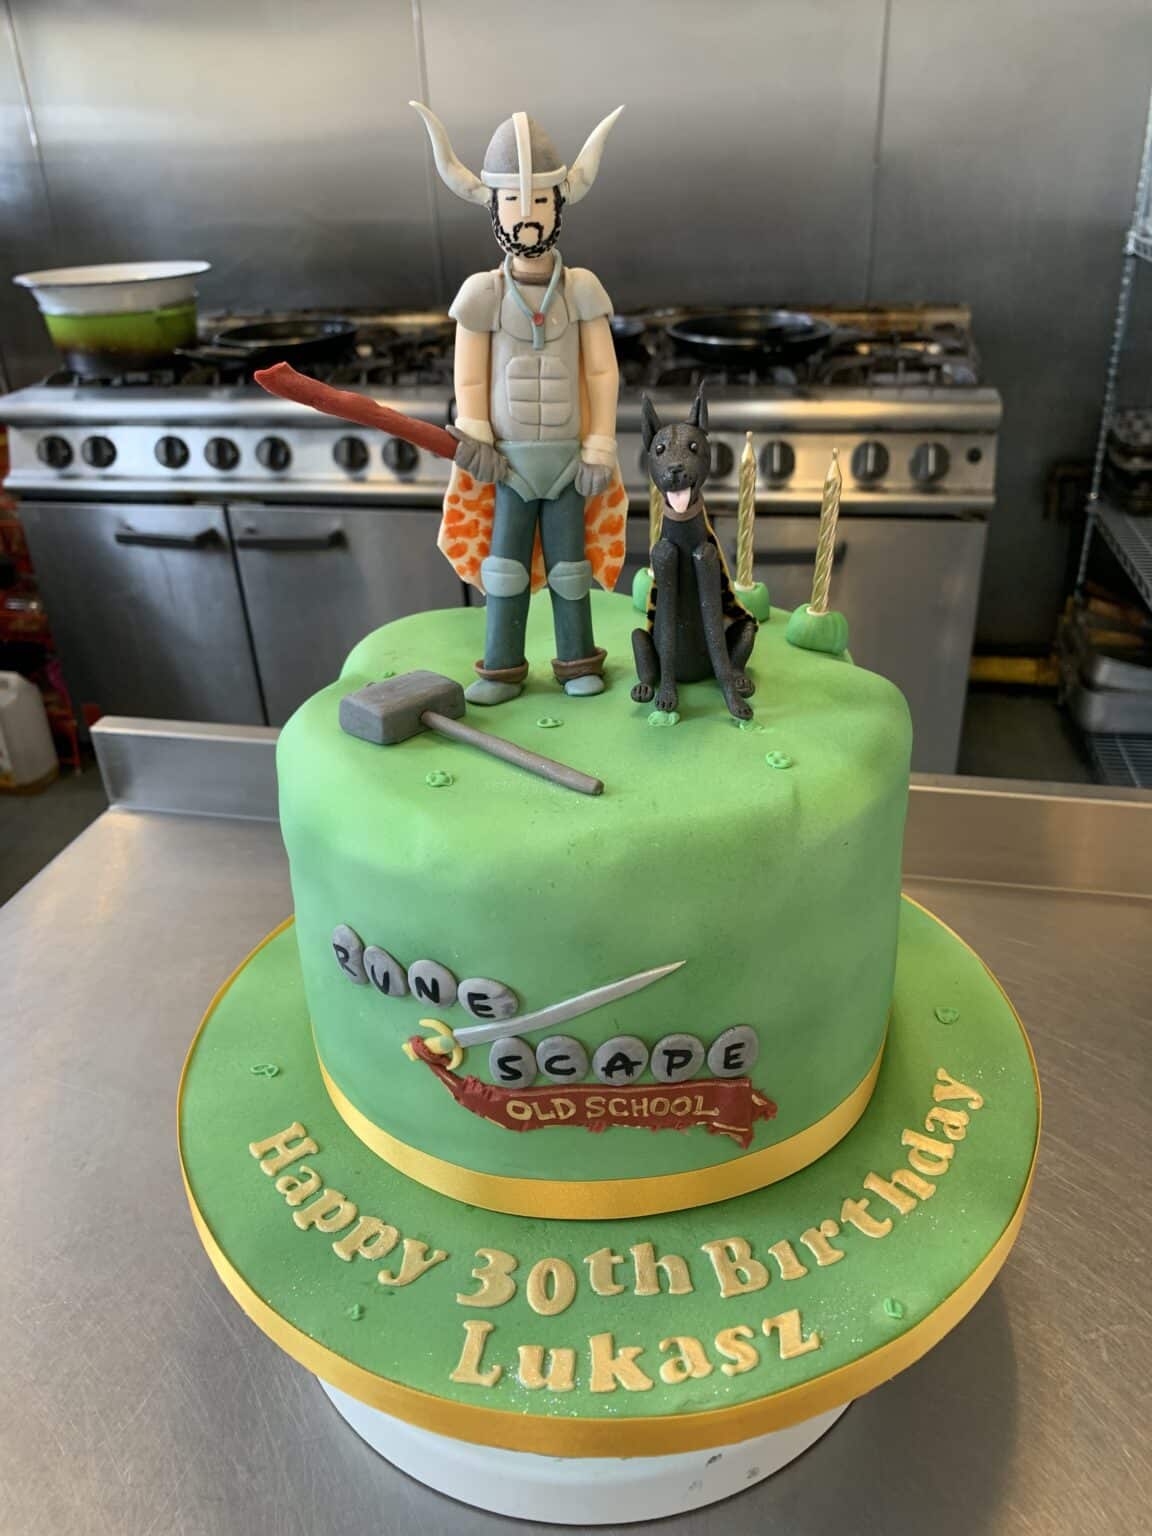 old school Runescape novelty birthday cake - dog and character on realistic designed cake